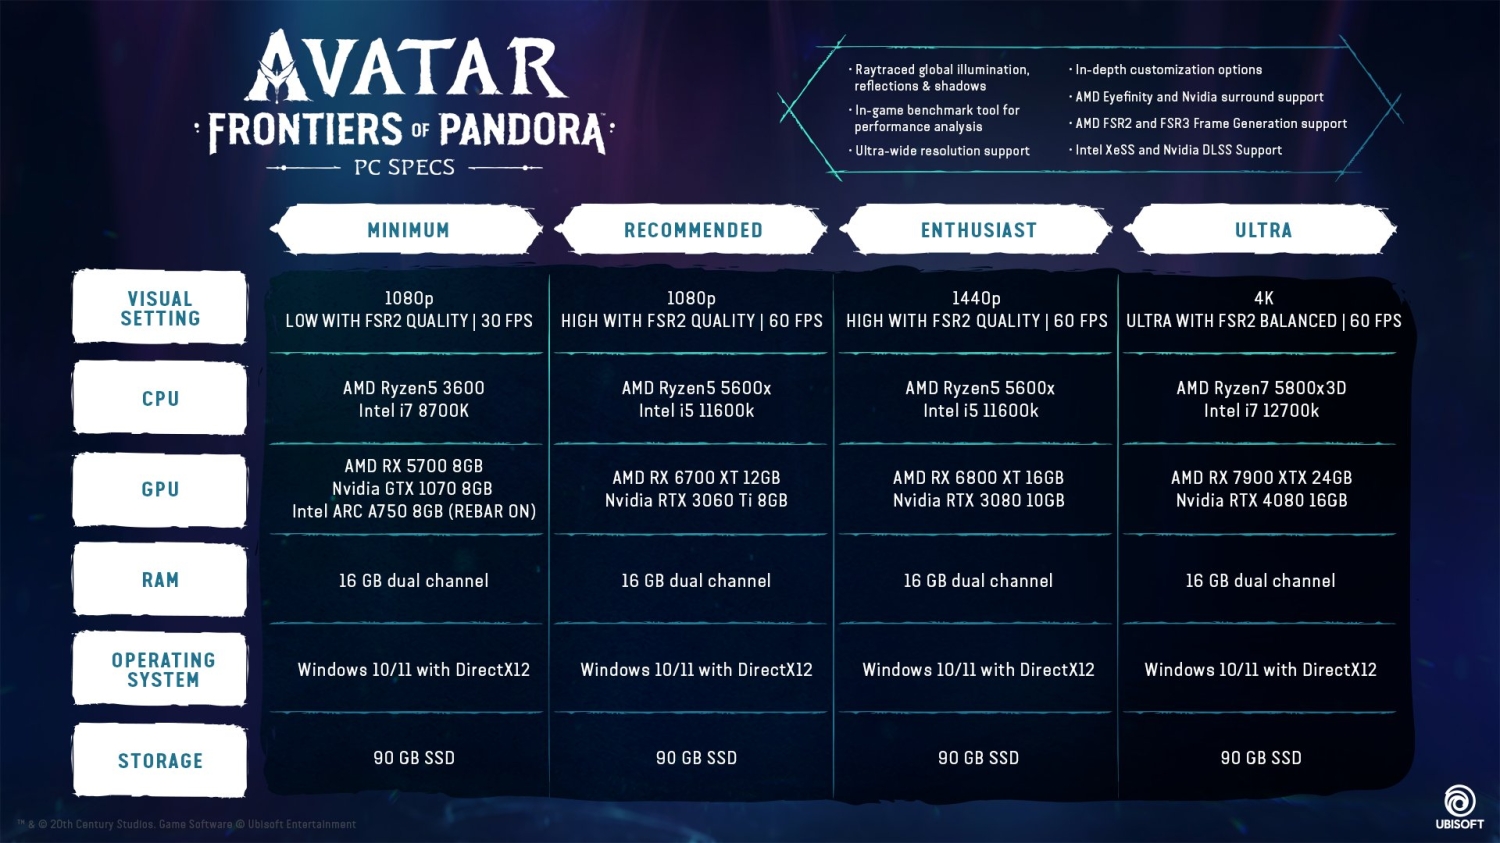 AMD Ryzen 7 7800X3D CPU Once Again Available For $339 US, Now Comes With  Avatar: Frontiers of Pandora Bundle